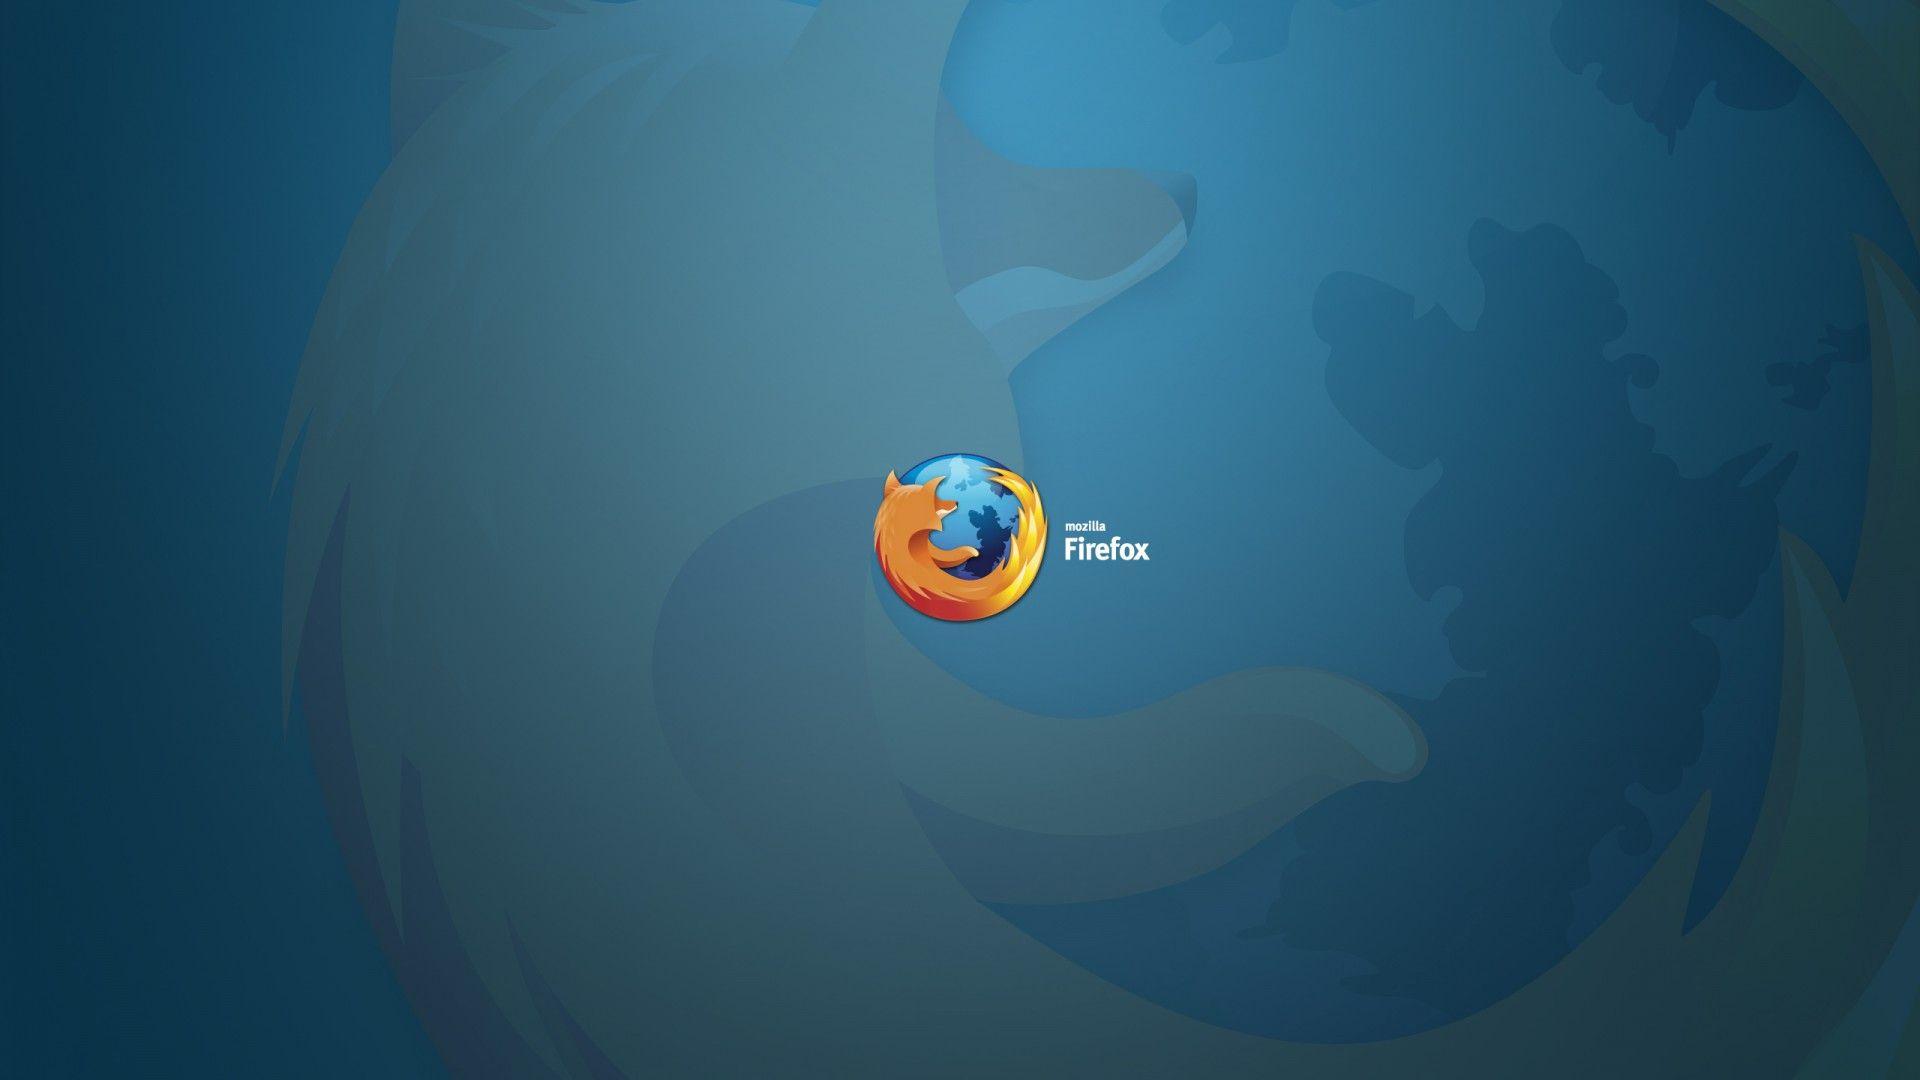 Wallpaper.wiki Background Firefox HD PIC WPB004769